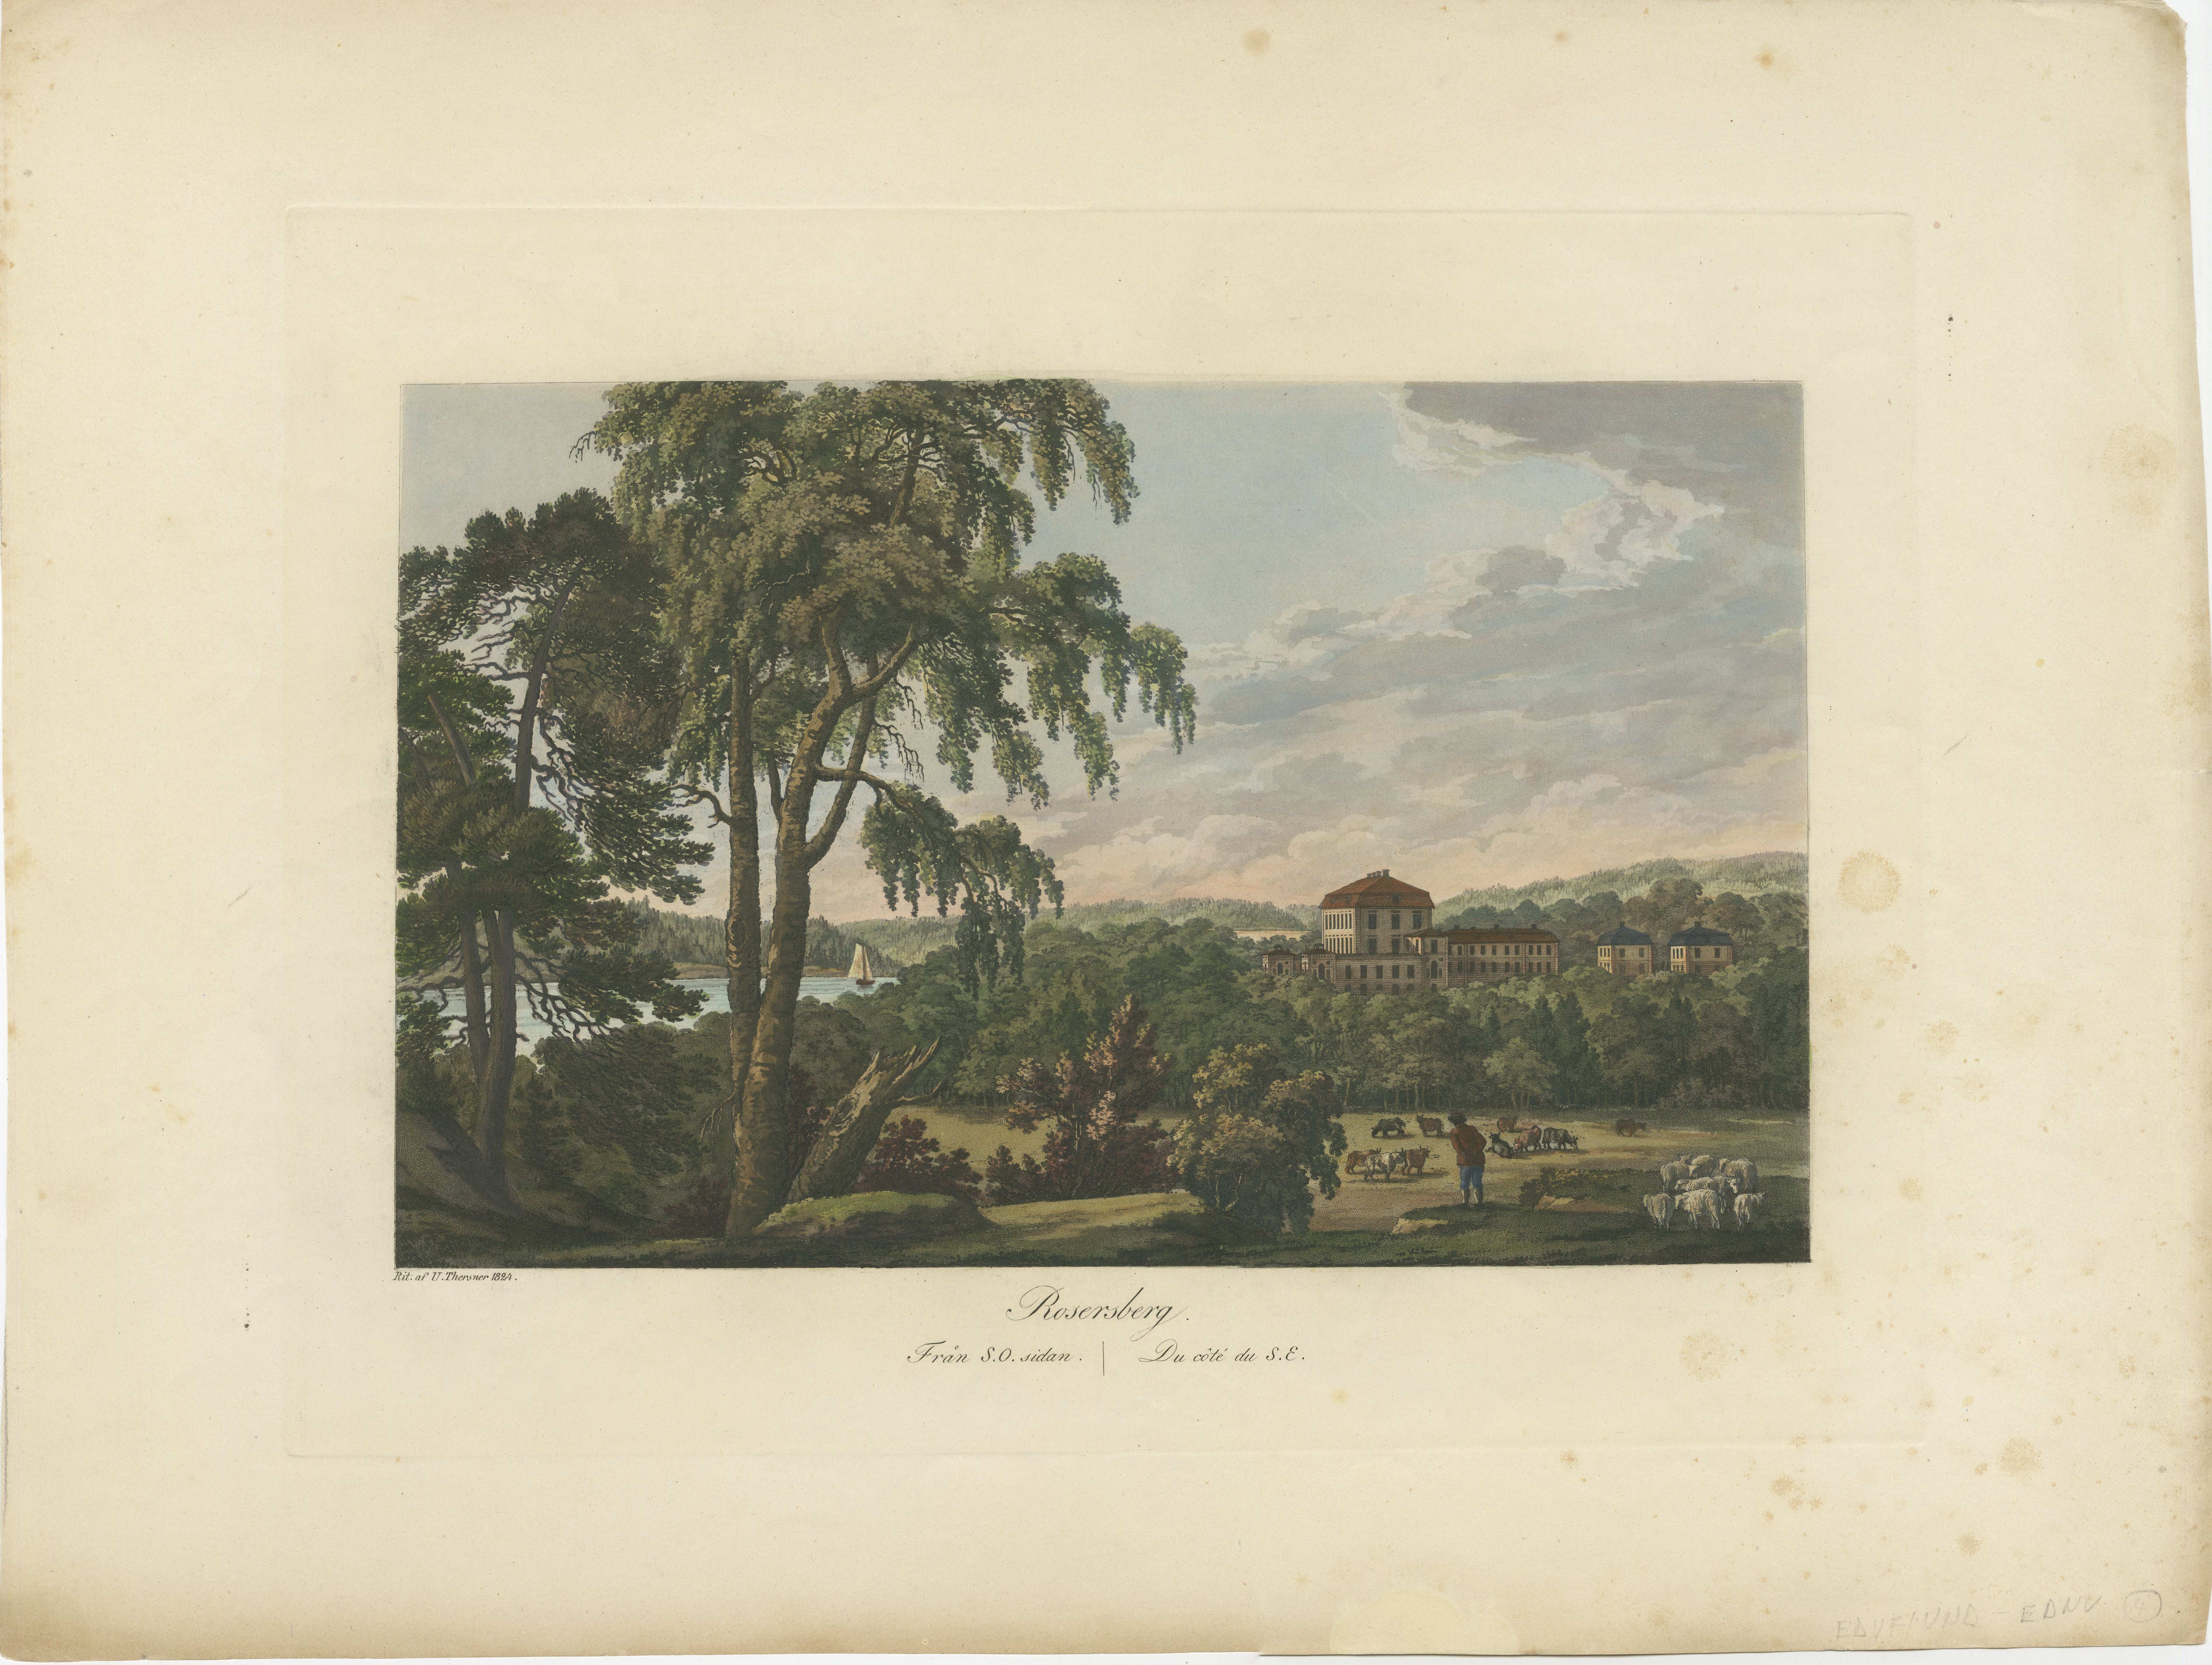 This beautiful original hand-colored antique print, made by Ulrik Thersner in 1824, is a fine example of his work. Thersner, known for his detailed and atmospheric landscapes, would have drawn this view of Djursholm Castle with great care, capturing